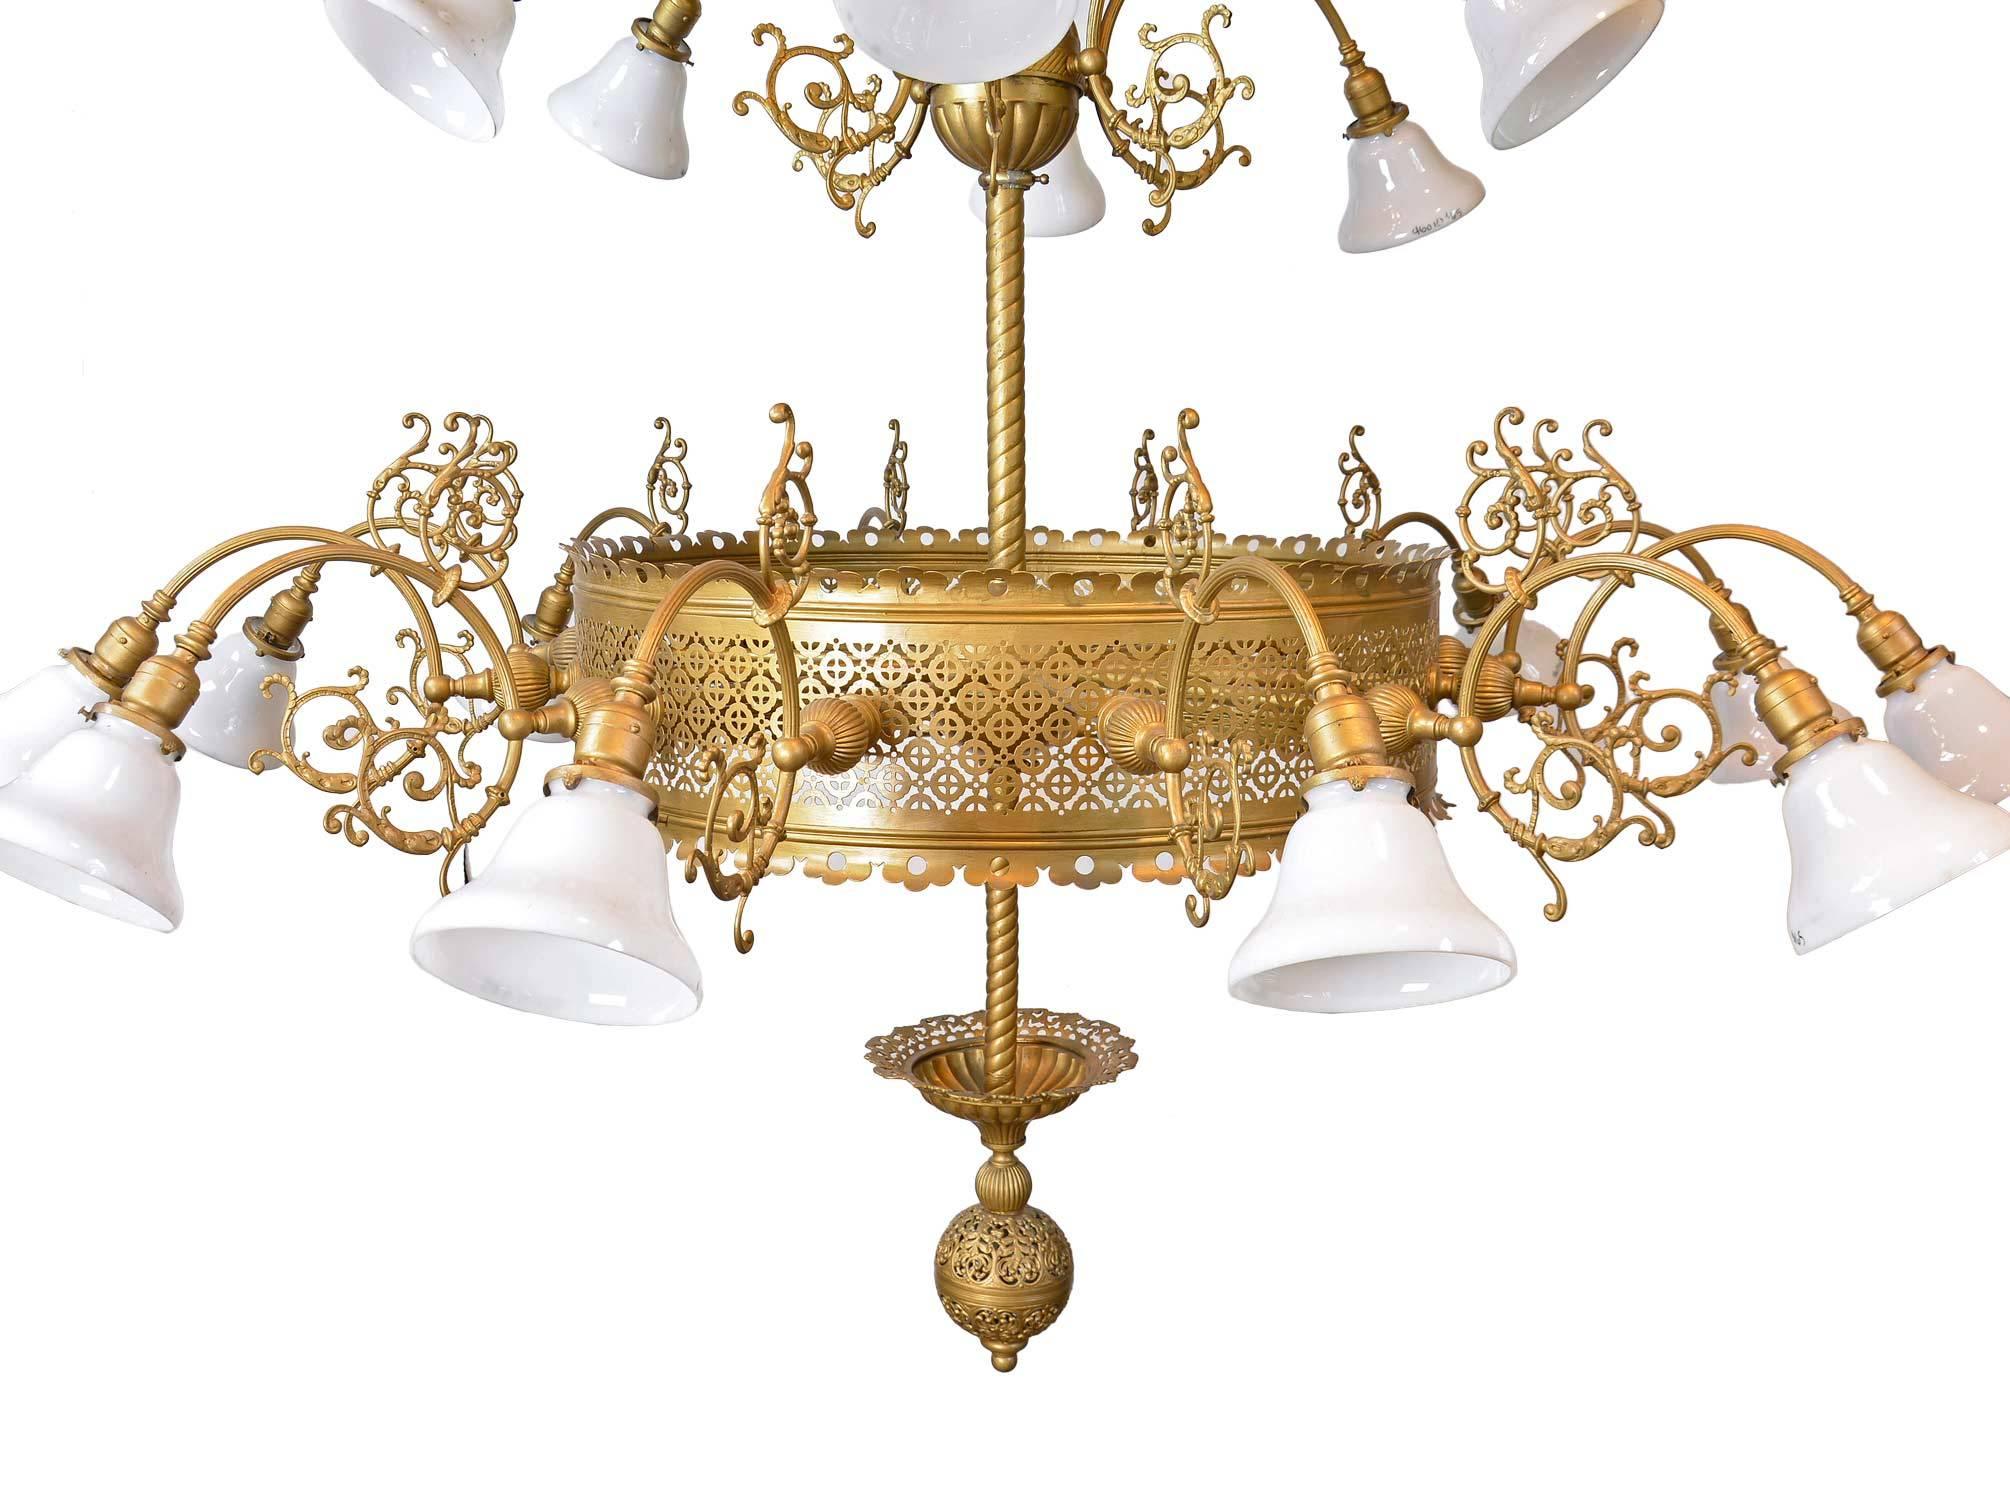 Extravagant Multi-Tiered Gothic Chandelier with Original Glass In Good Condition For Sale In Minneapolis, MN